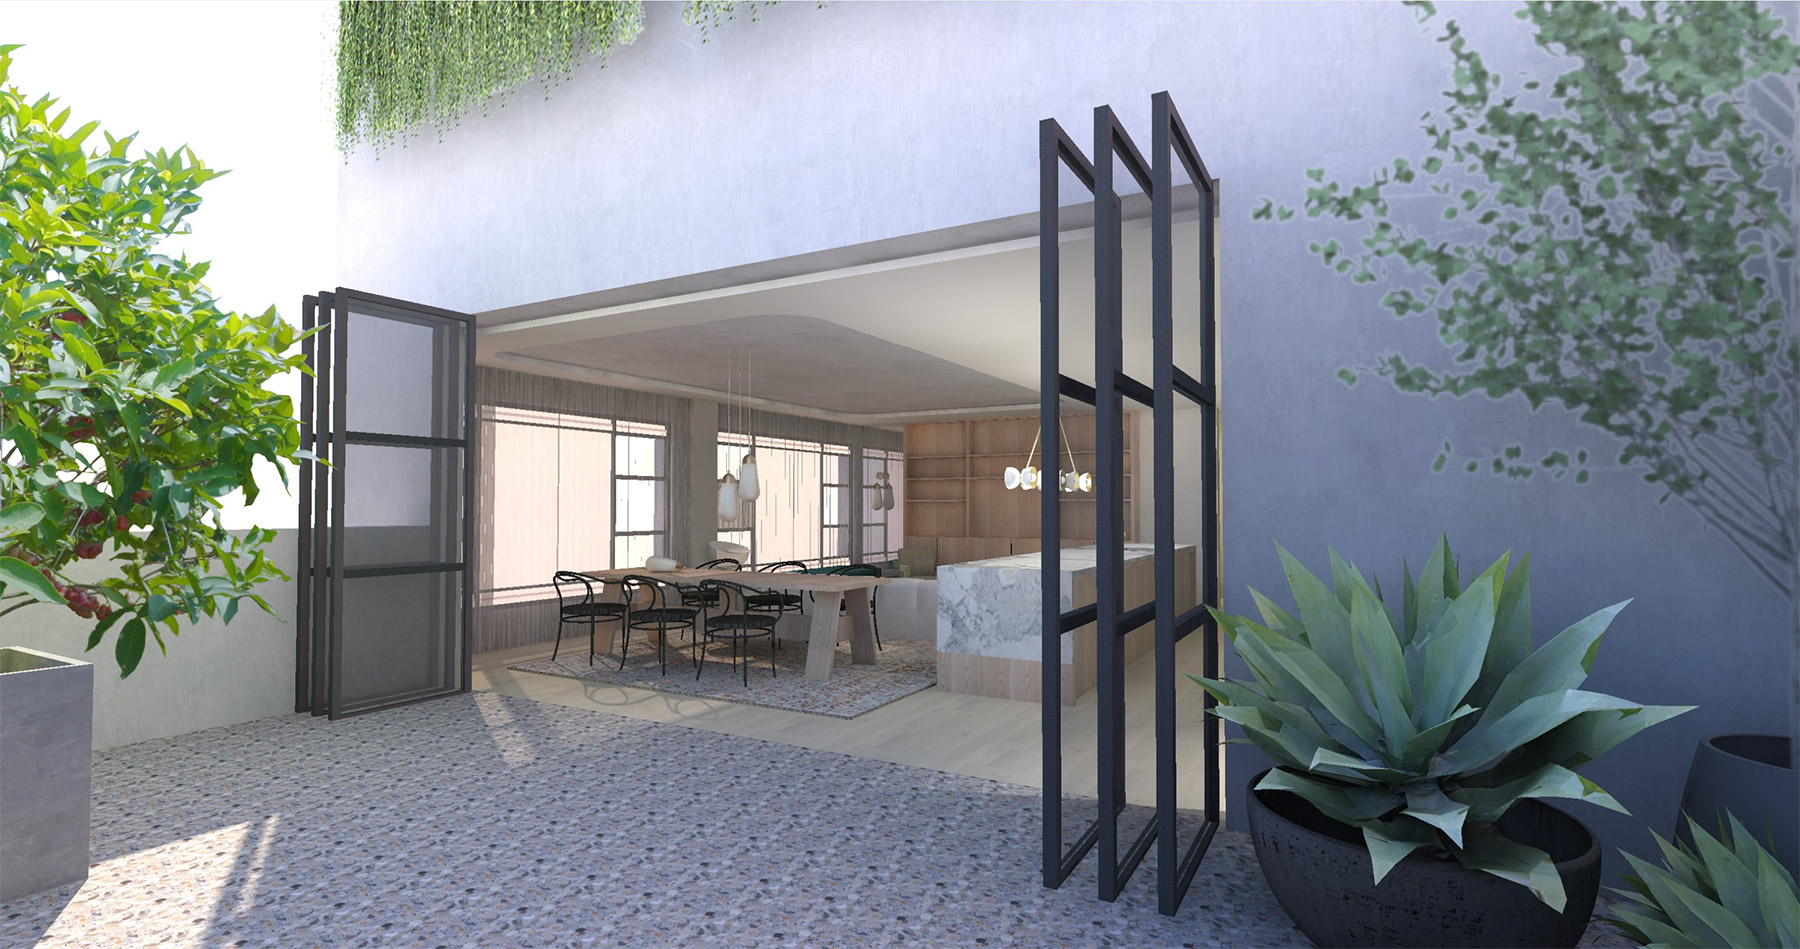 Which interior design software is right for me? Revit rendering by Sydney Design School student Jed Murphy